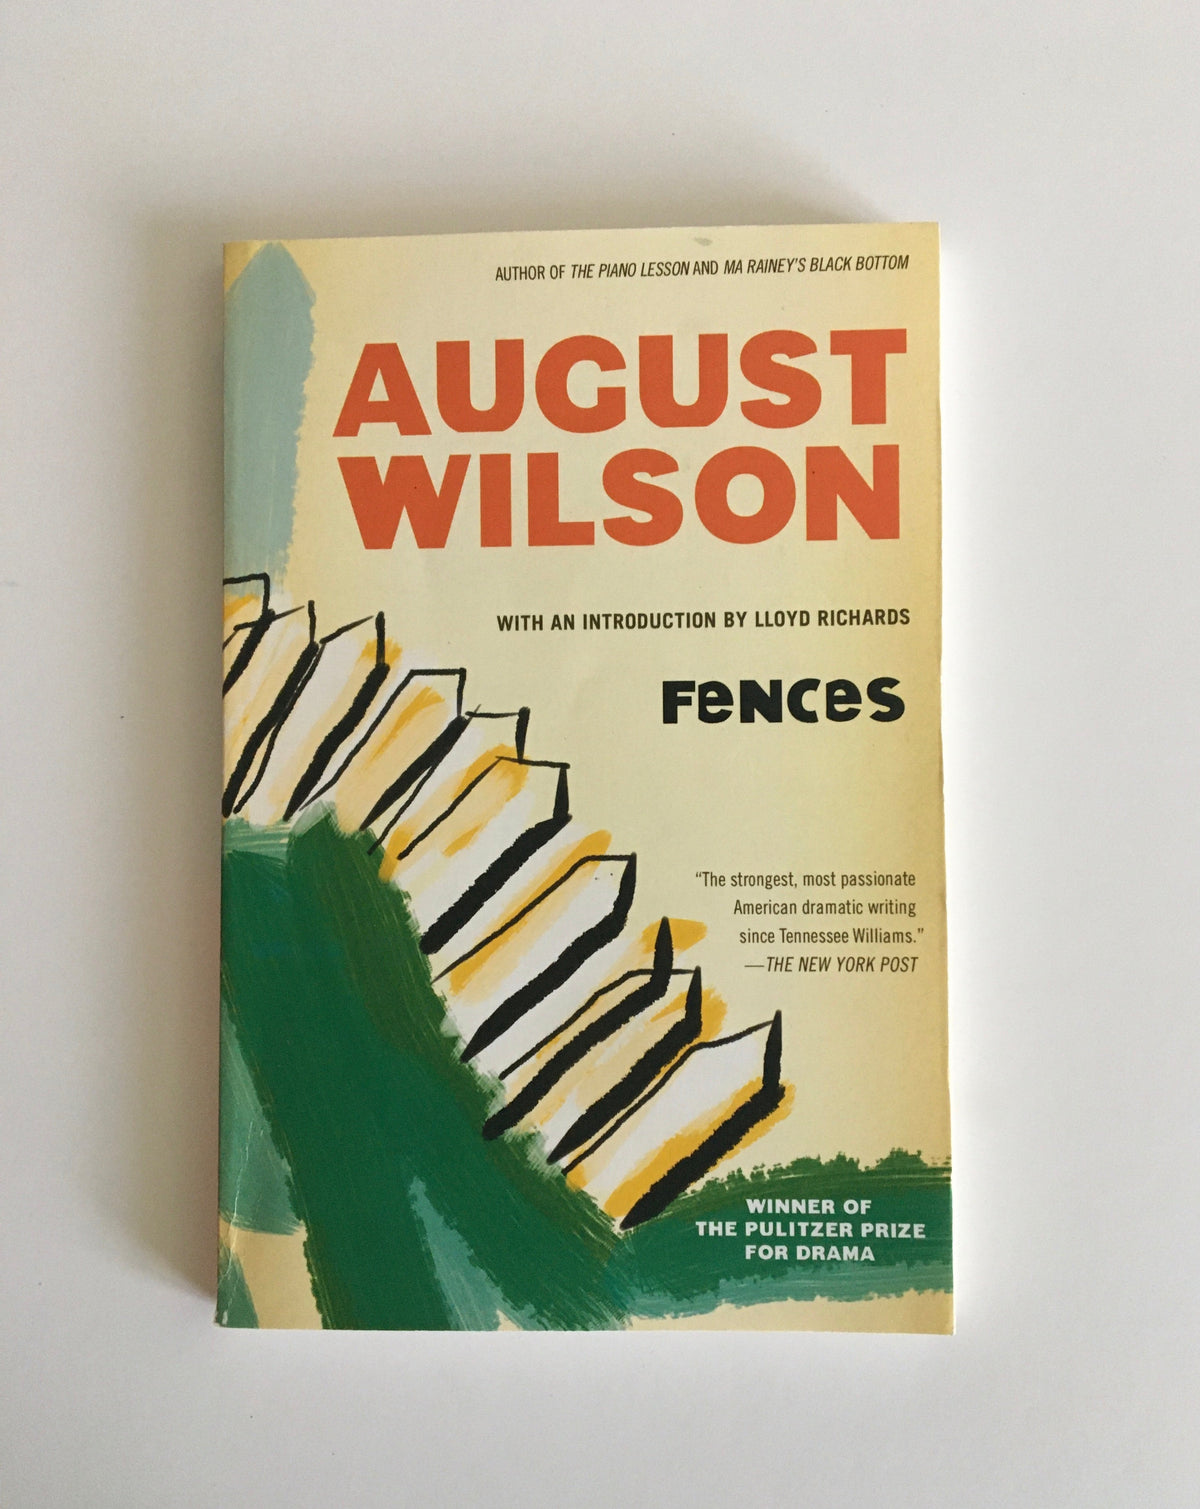 DONATE: Fences by August Wilson